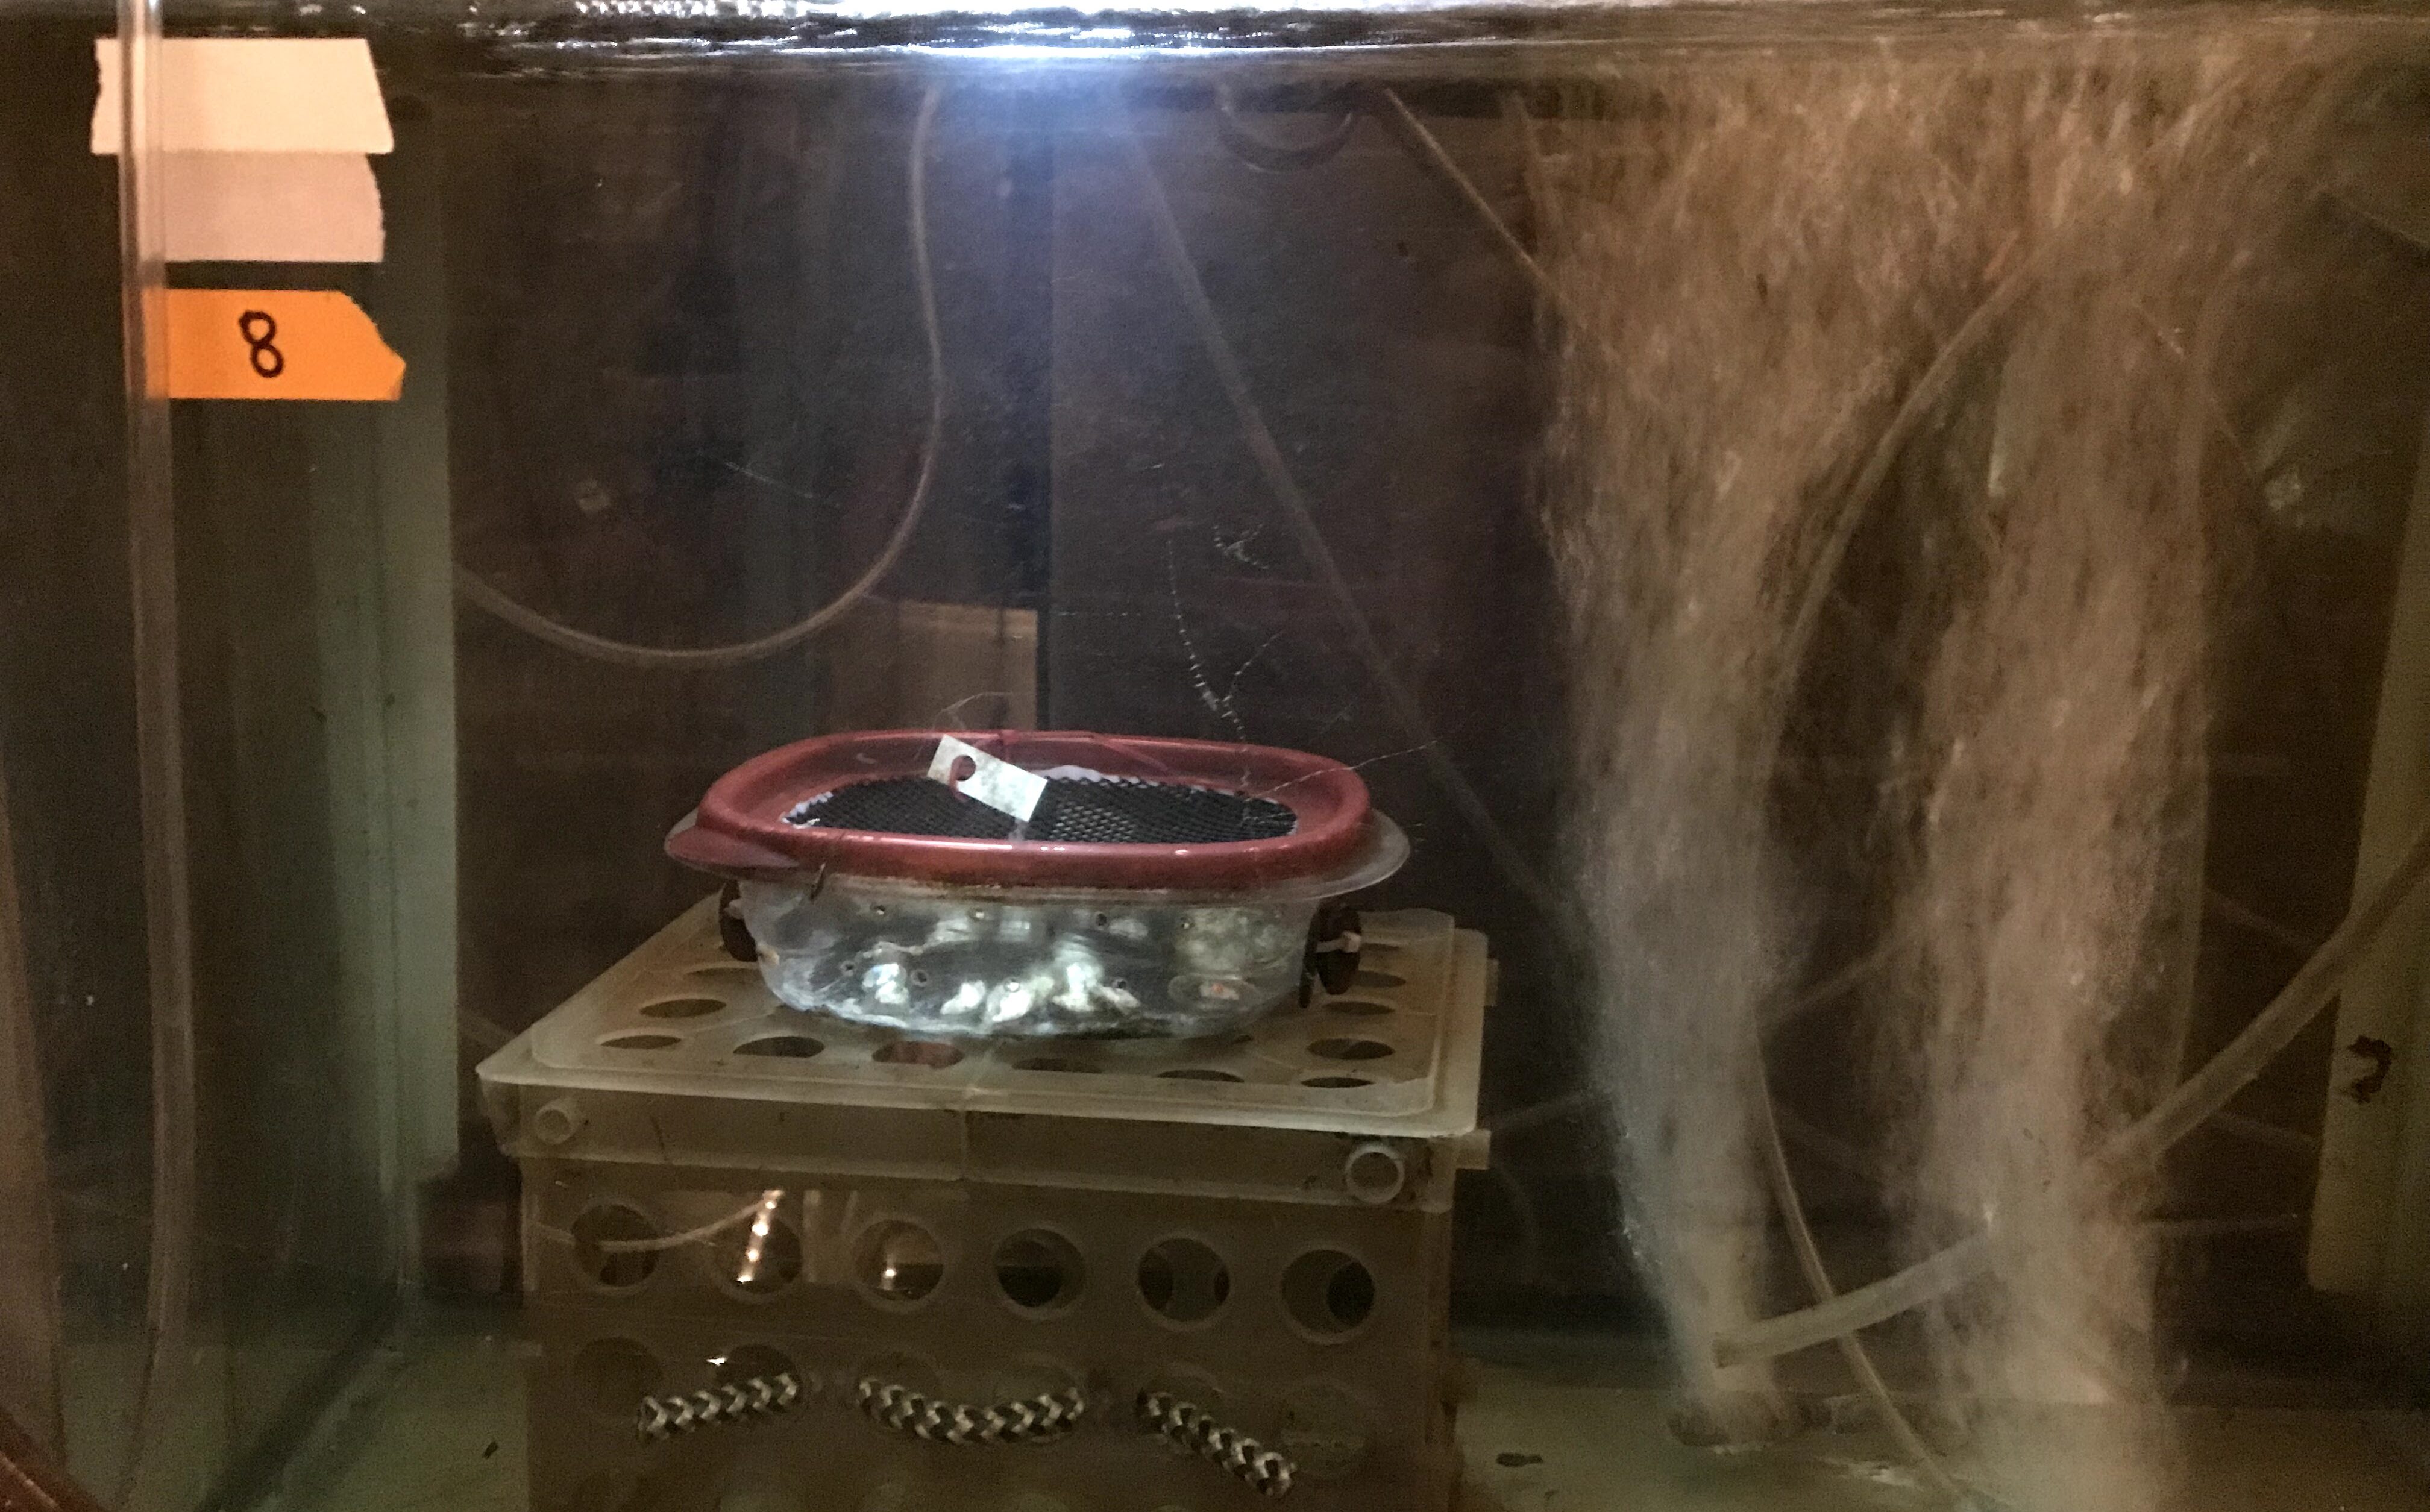 Aquarium with clear container of oysters on a metal crate, and two streams of bubbles in the corner